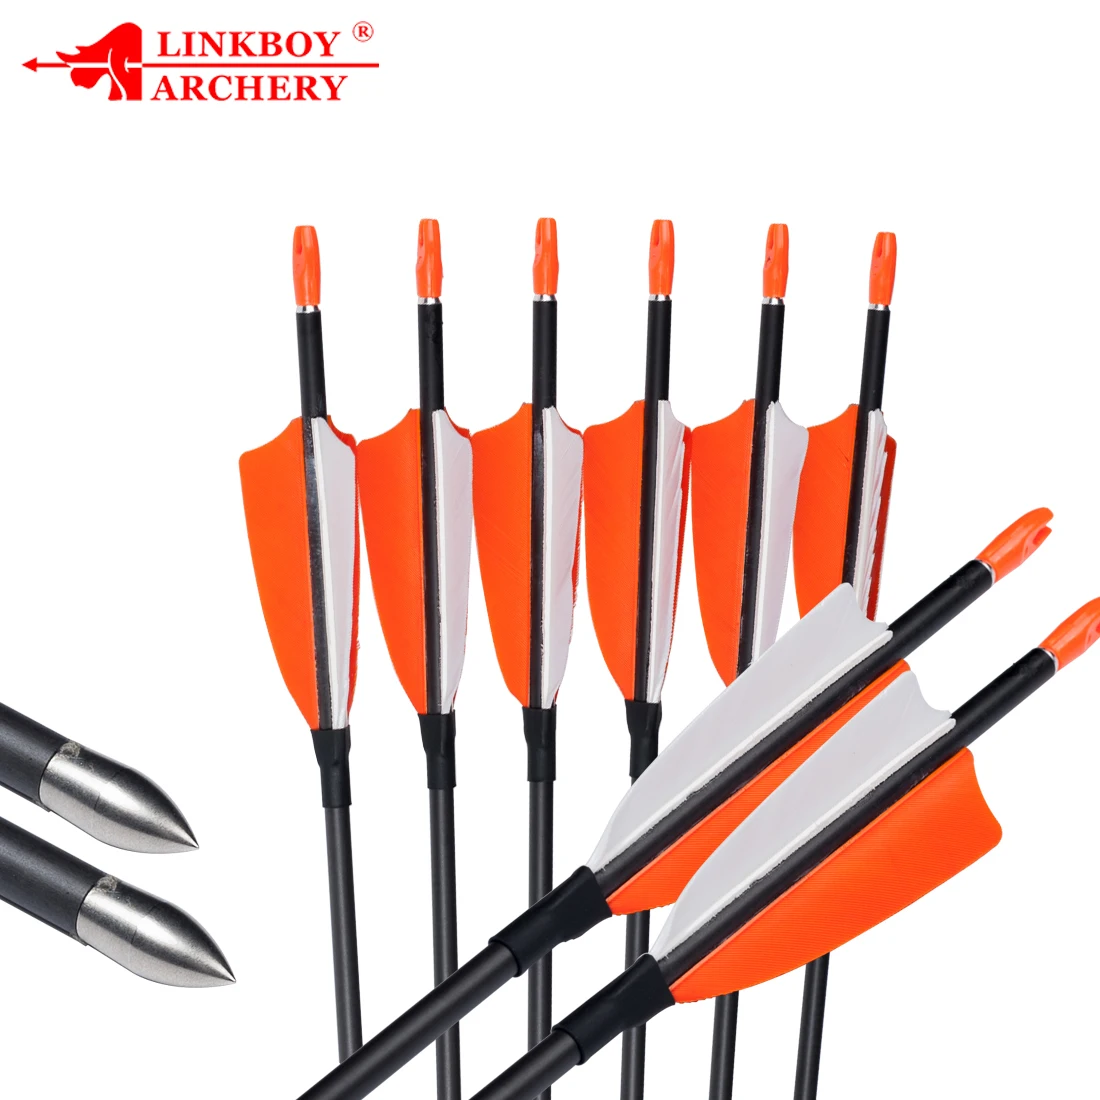 linkboy-pure-carbon-archery-arrows-pin-nock-80gr-tips-for-recurve-bow-shooting-spine400-1800-id42mm